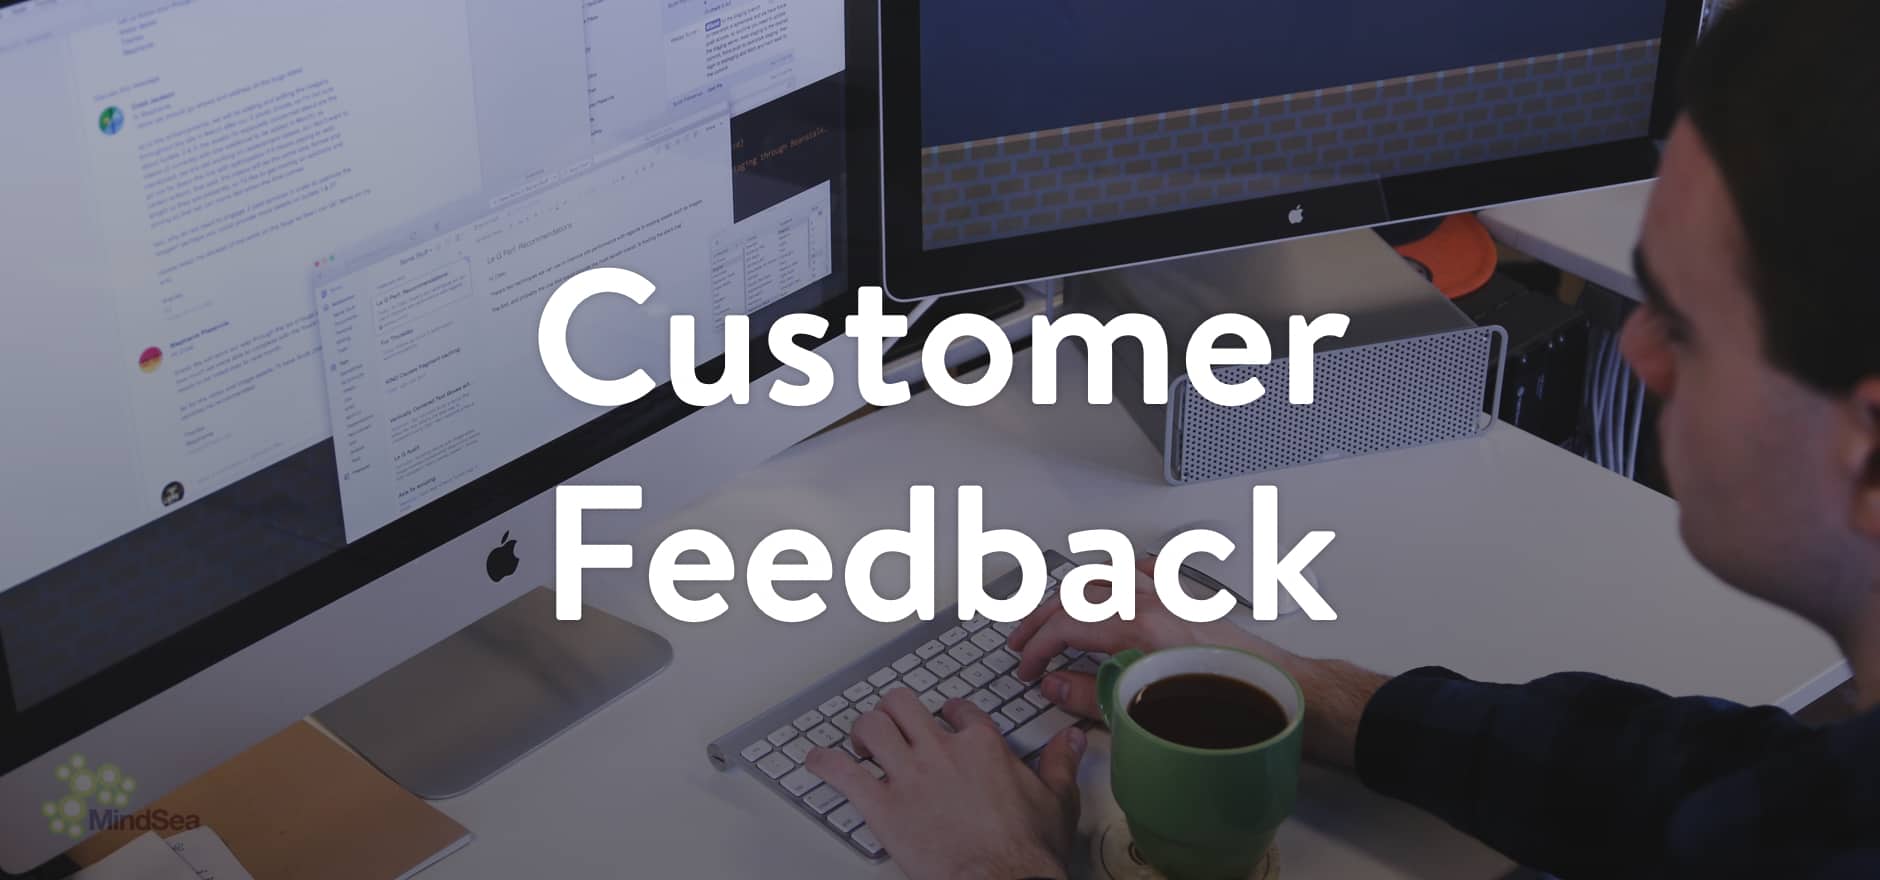 Iterate Quickly by listening to Customer Feedback